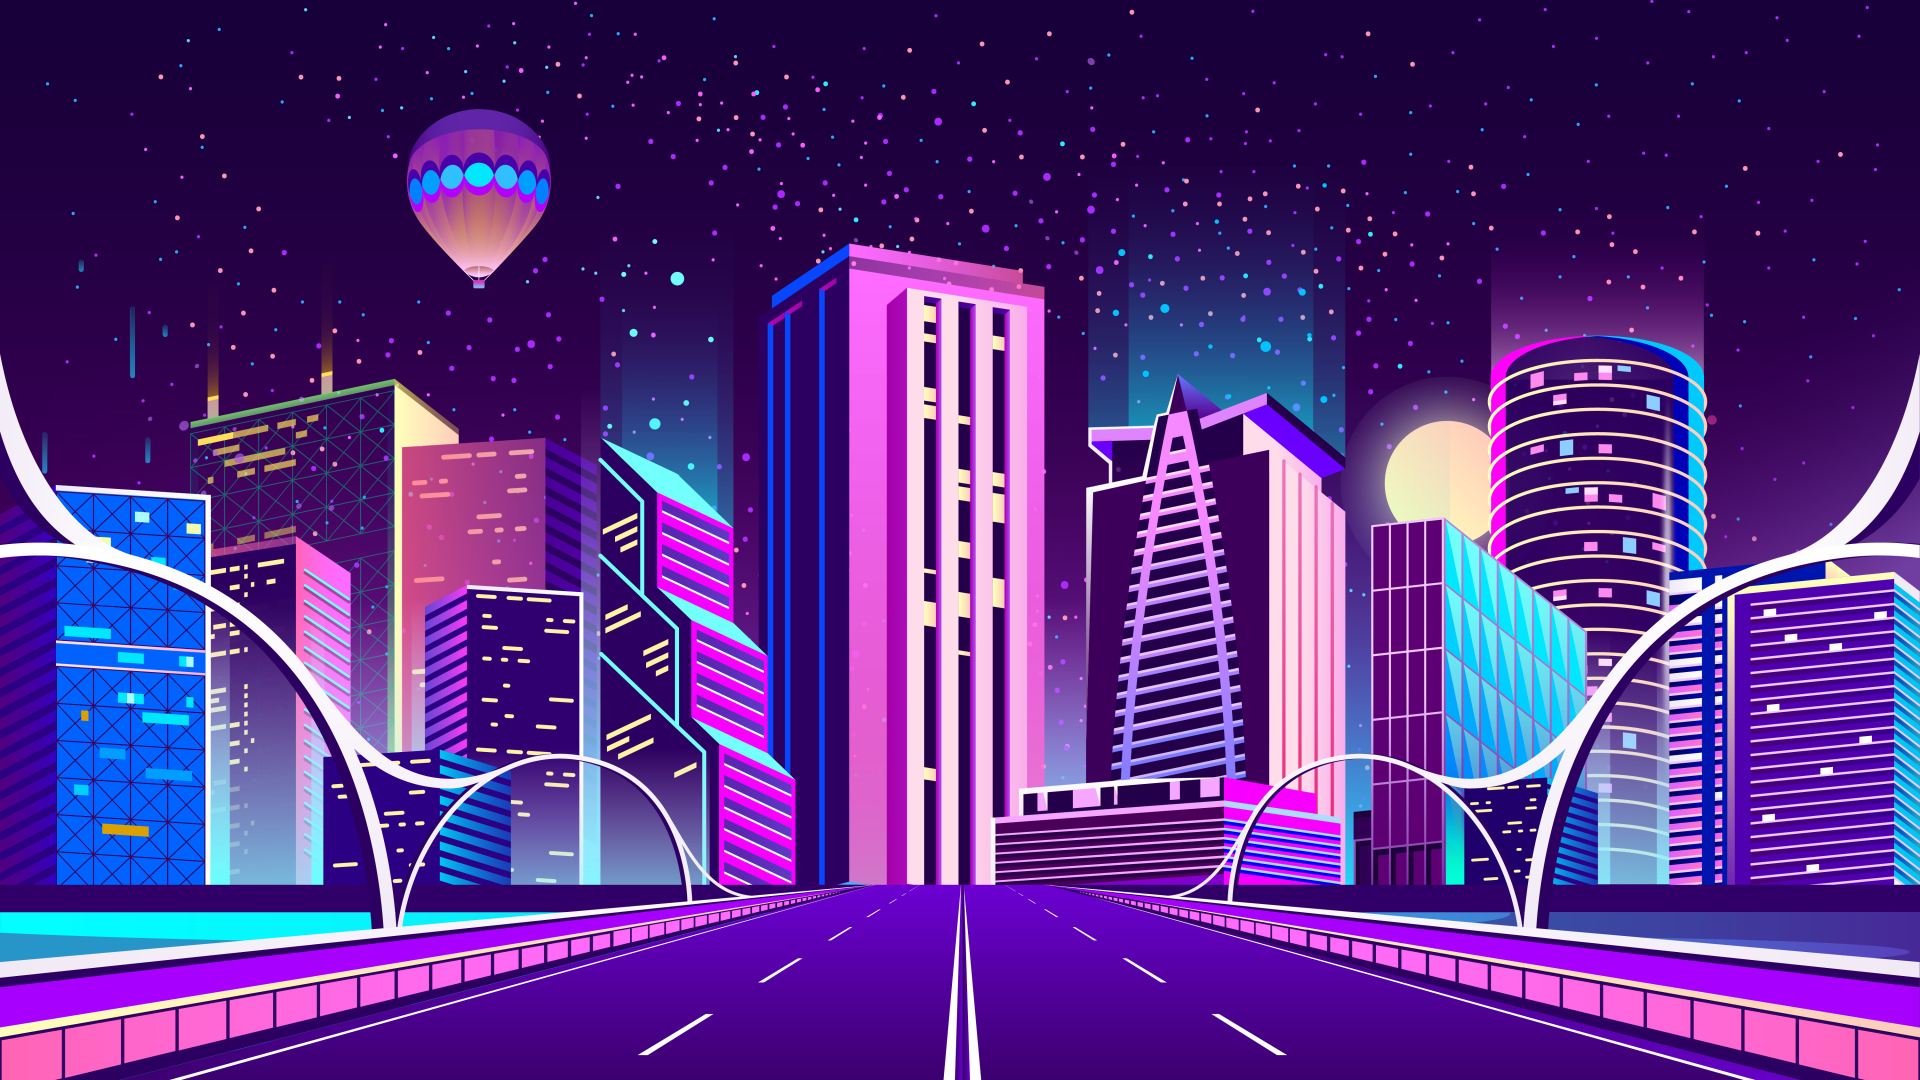 General 1920x1080 artwork neon building road hot air balloons retro style